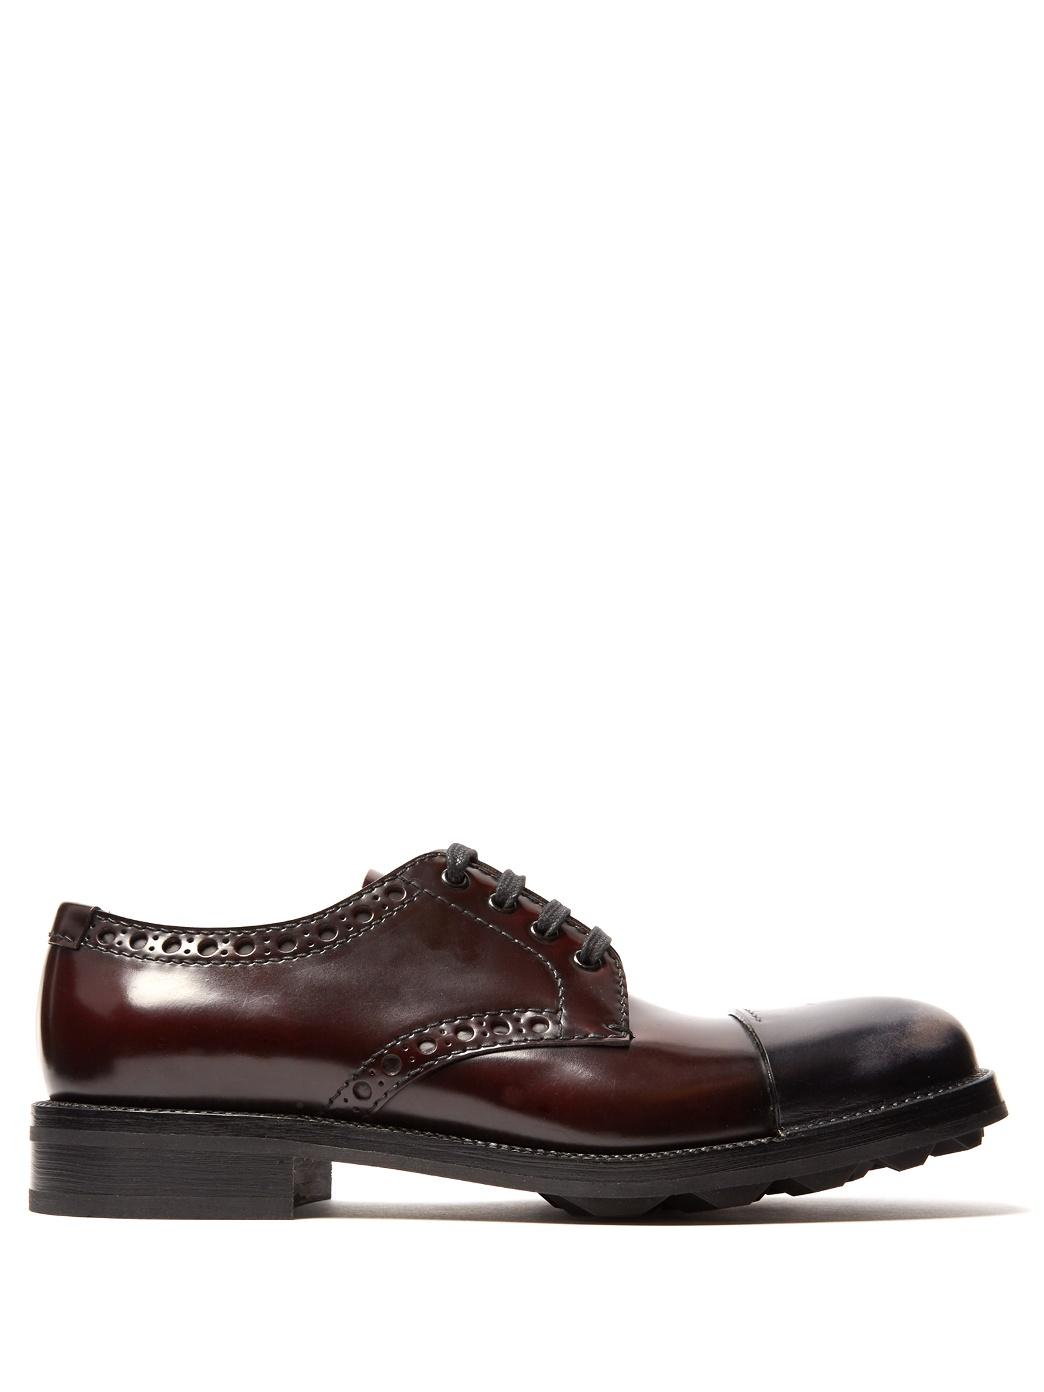 Like a Boss – The New Brogues